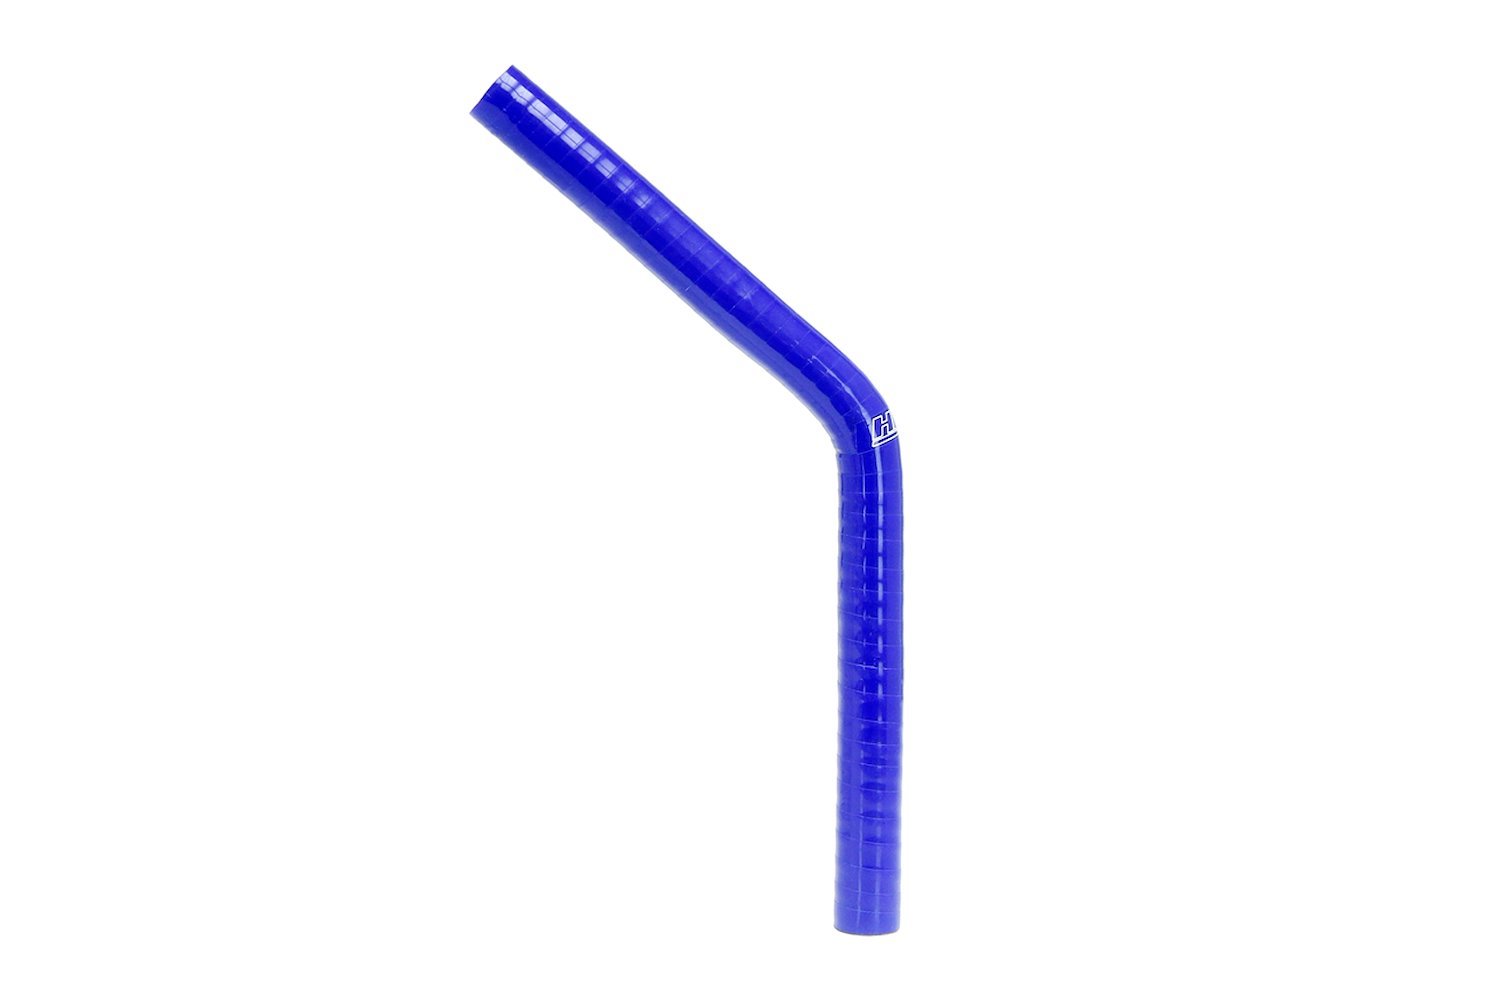 HTSEC45-100-L10-BLUE Silicone 45-Degree Elbow Hose, High-Temp 4-Ply Reinforced, 1 in. ID, 10 in. Leg, Blue